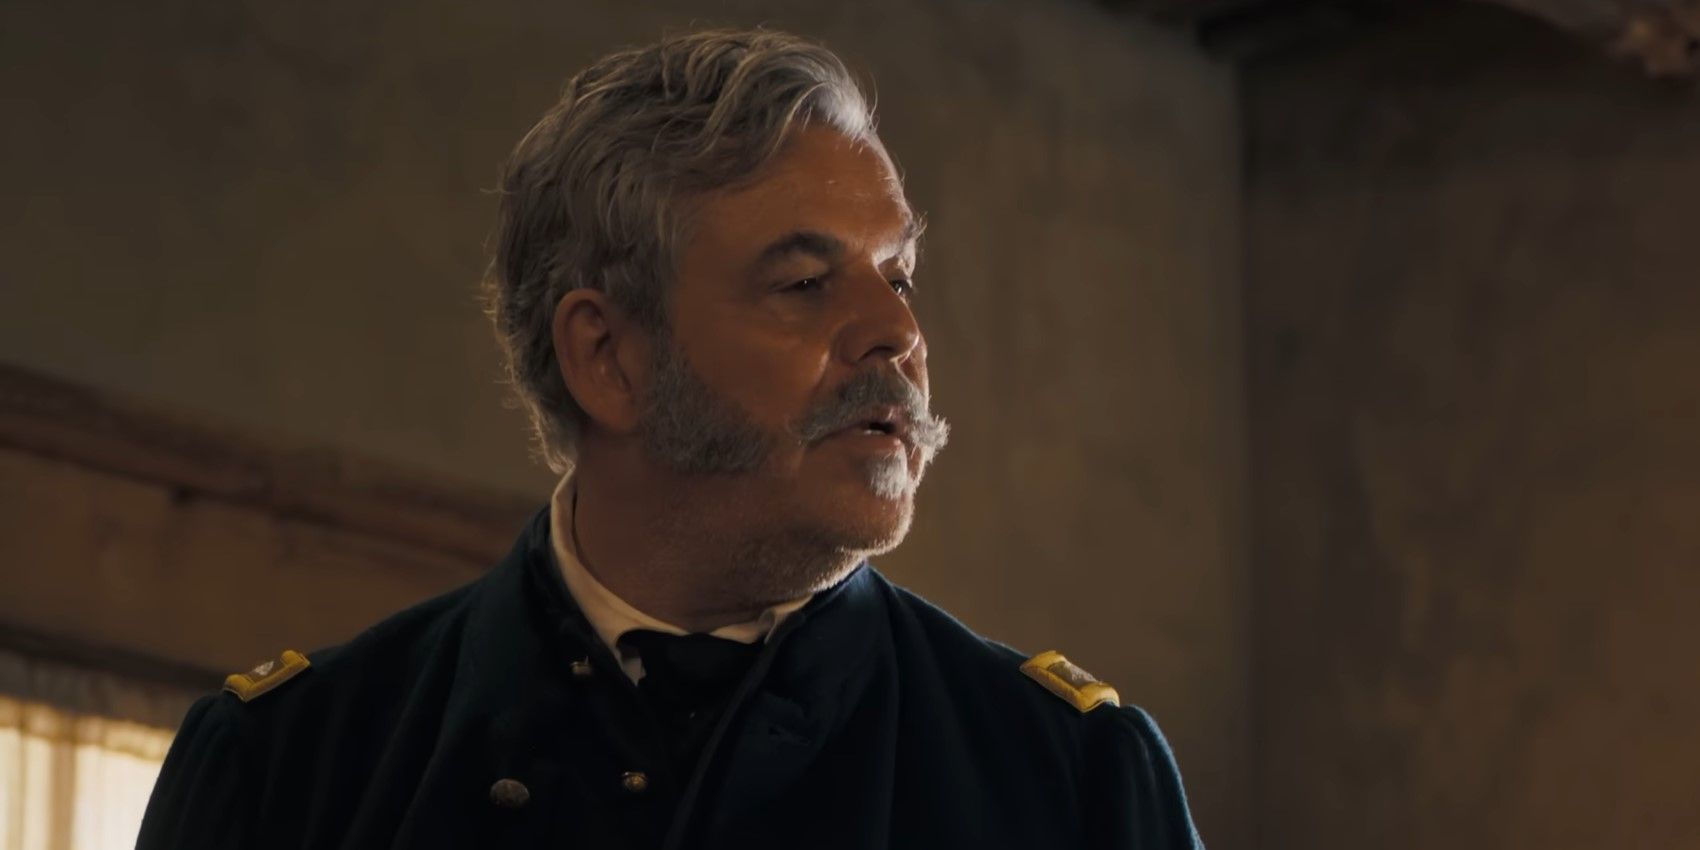 Danny Huston wearing a Union military outfit and sporting a mustache and sideburns in the trailer for Horizon: An American Saga - Chapter 1